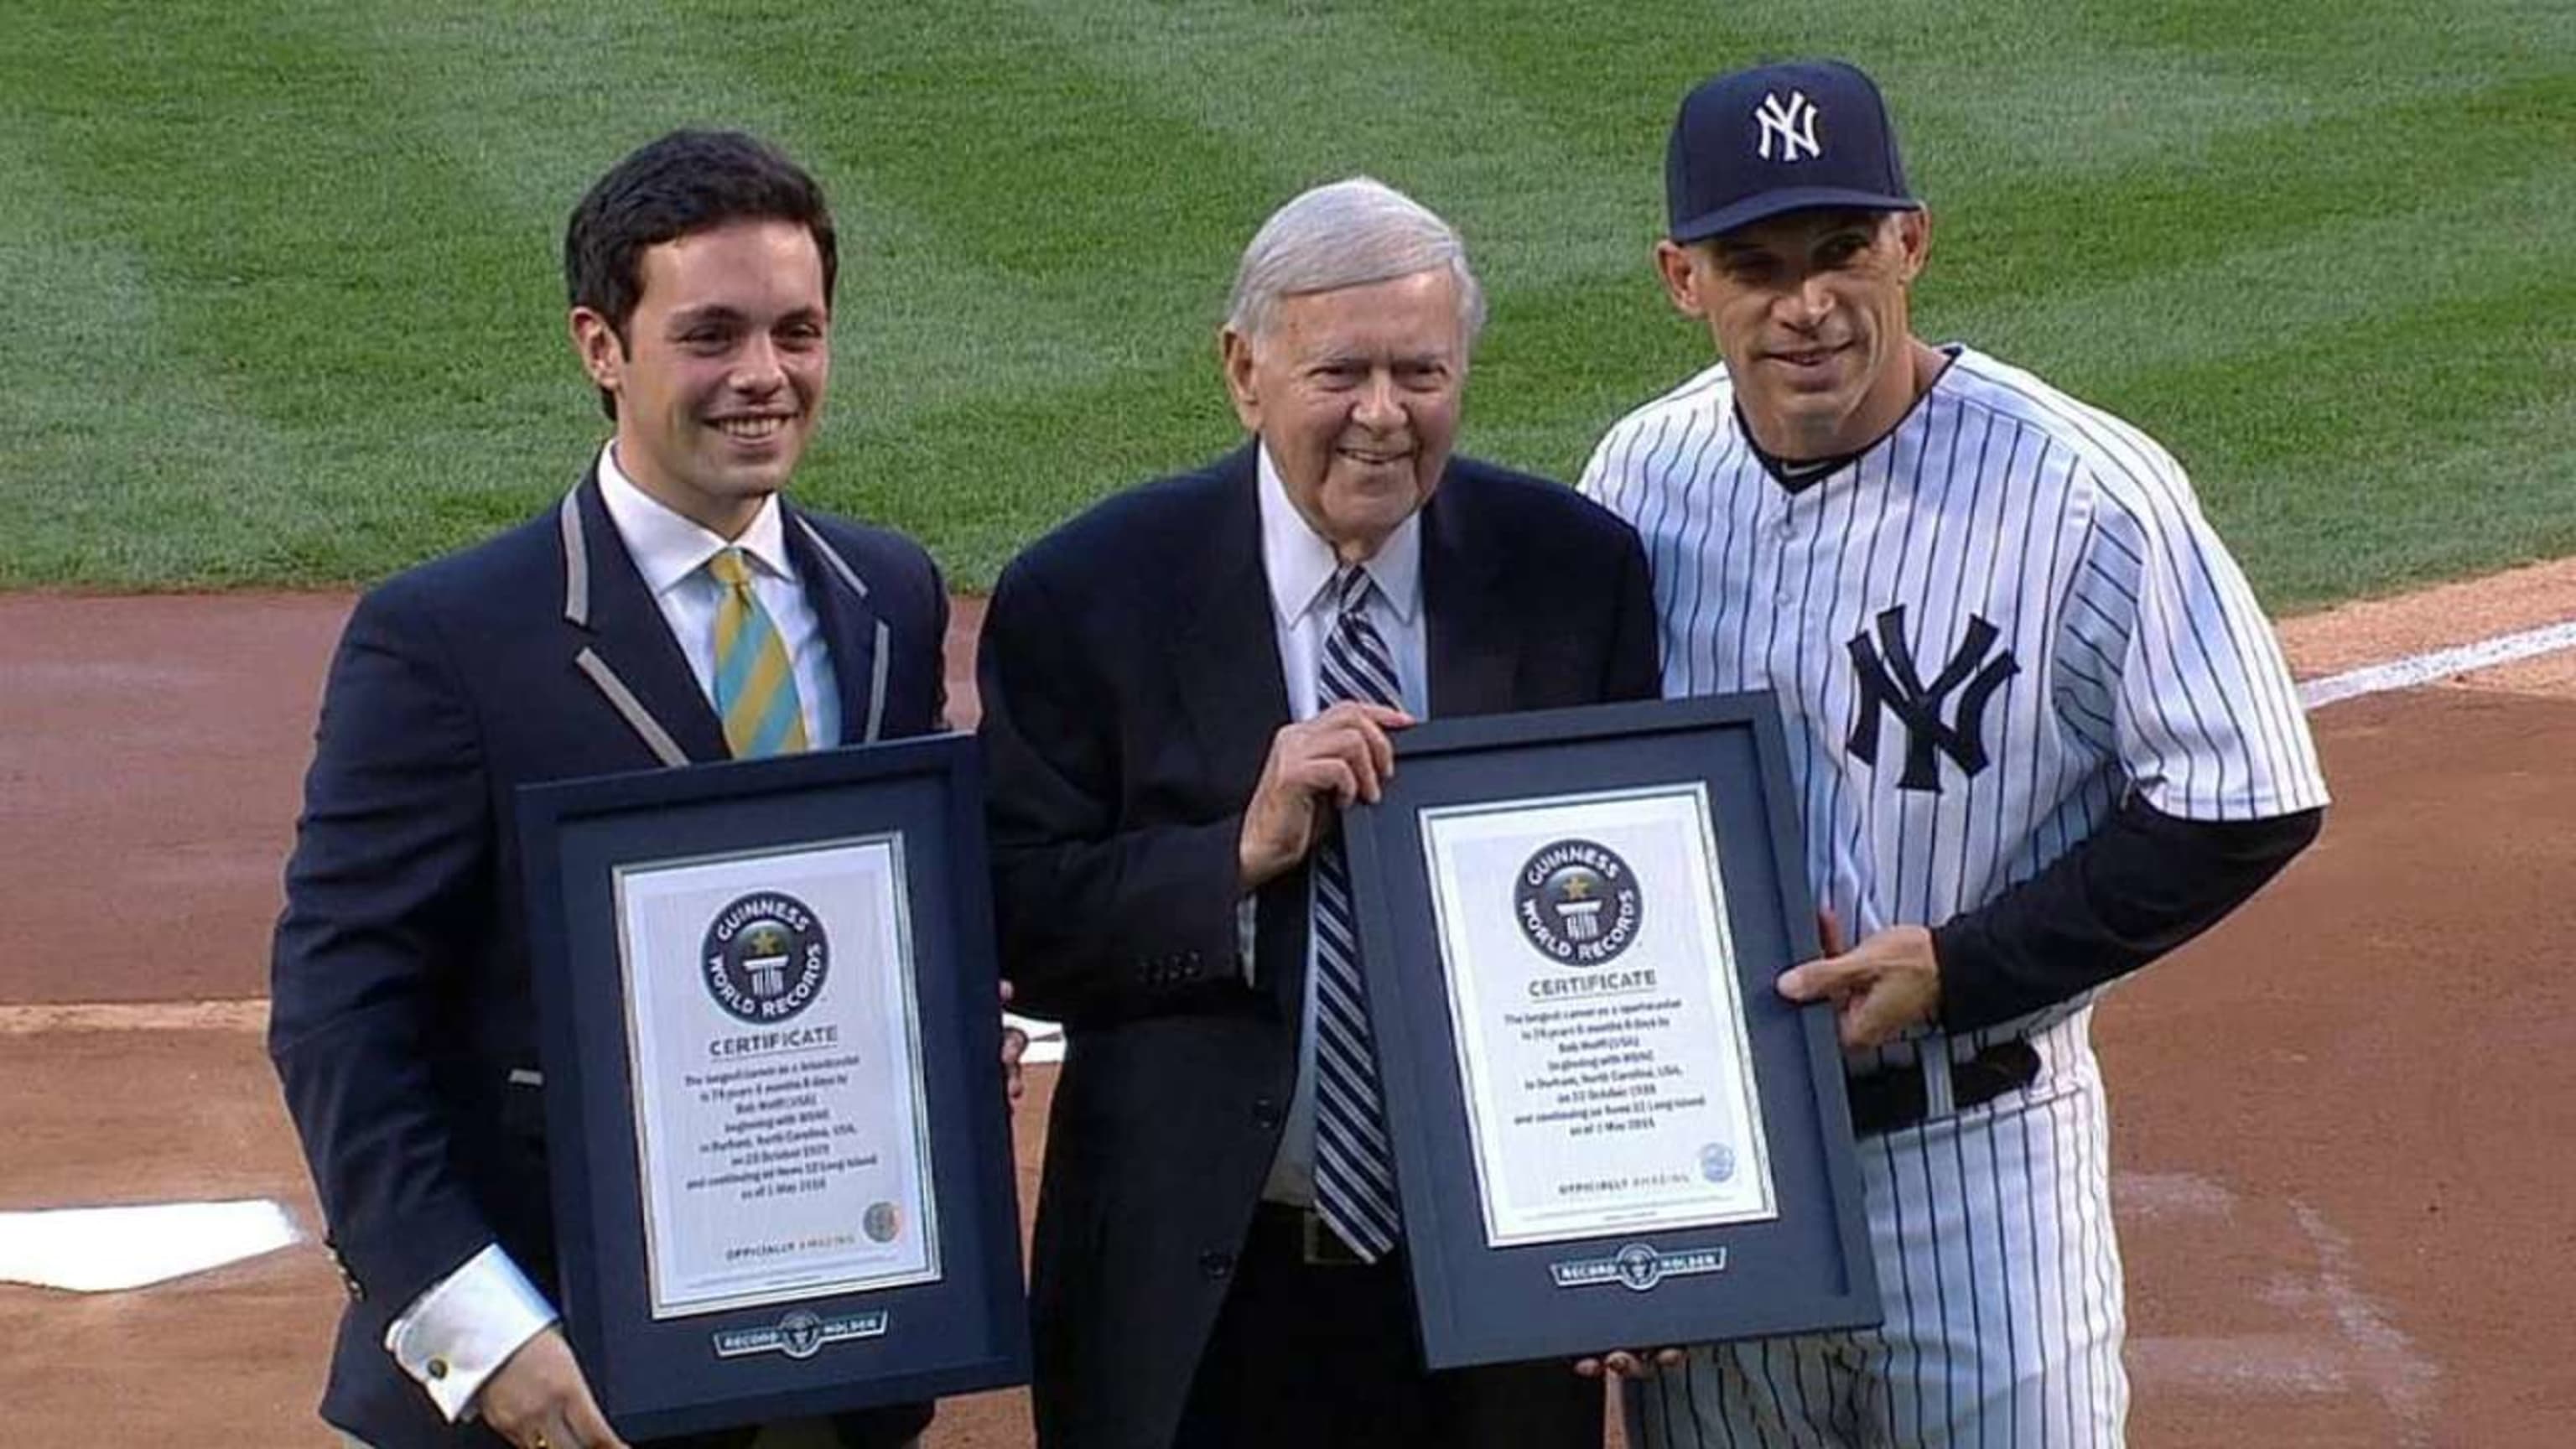 Don Larsen dies: Yankees SP famous for World Series perfect game